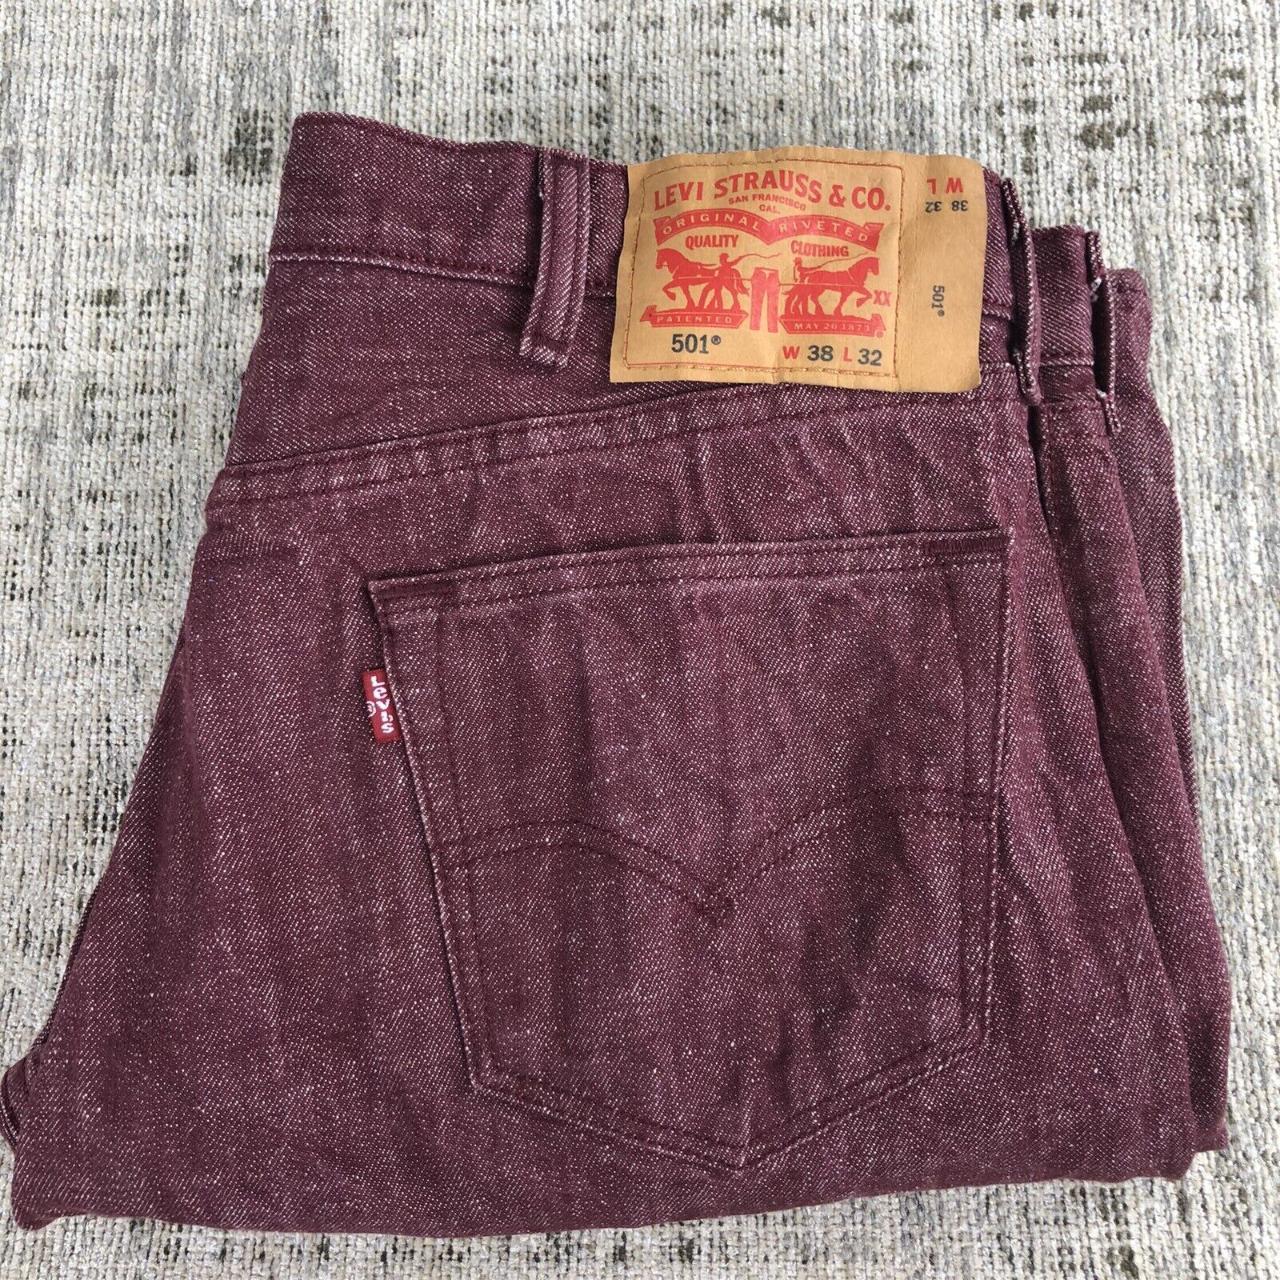 Levis 501 Mens 38x32 Jeans Button Fly Burgundy Red... - Depop